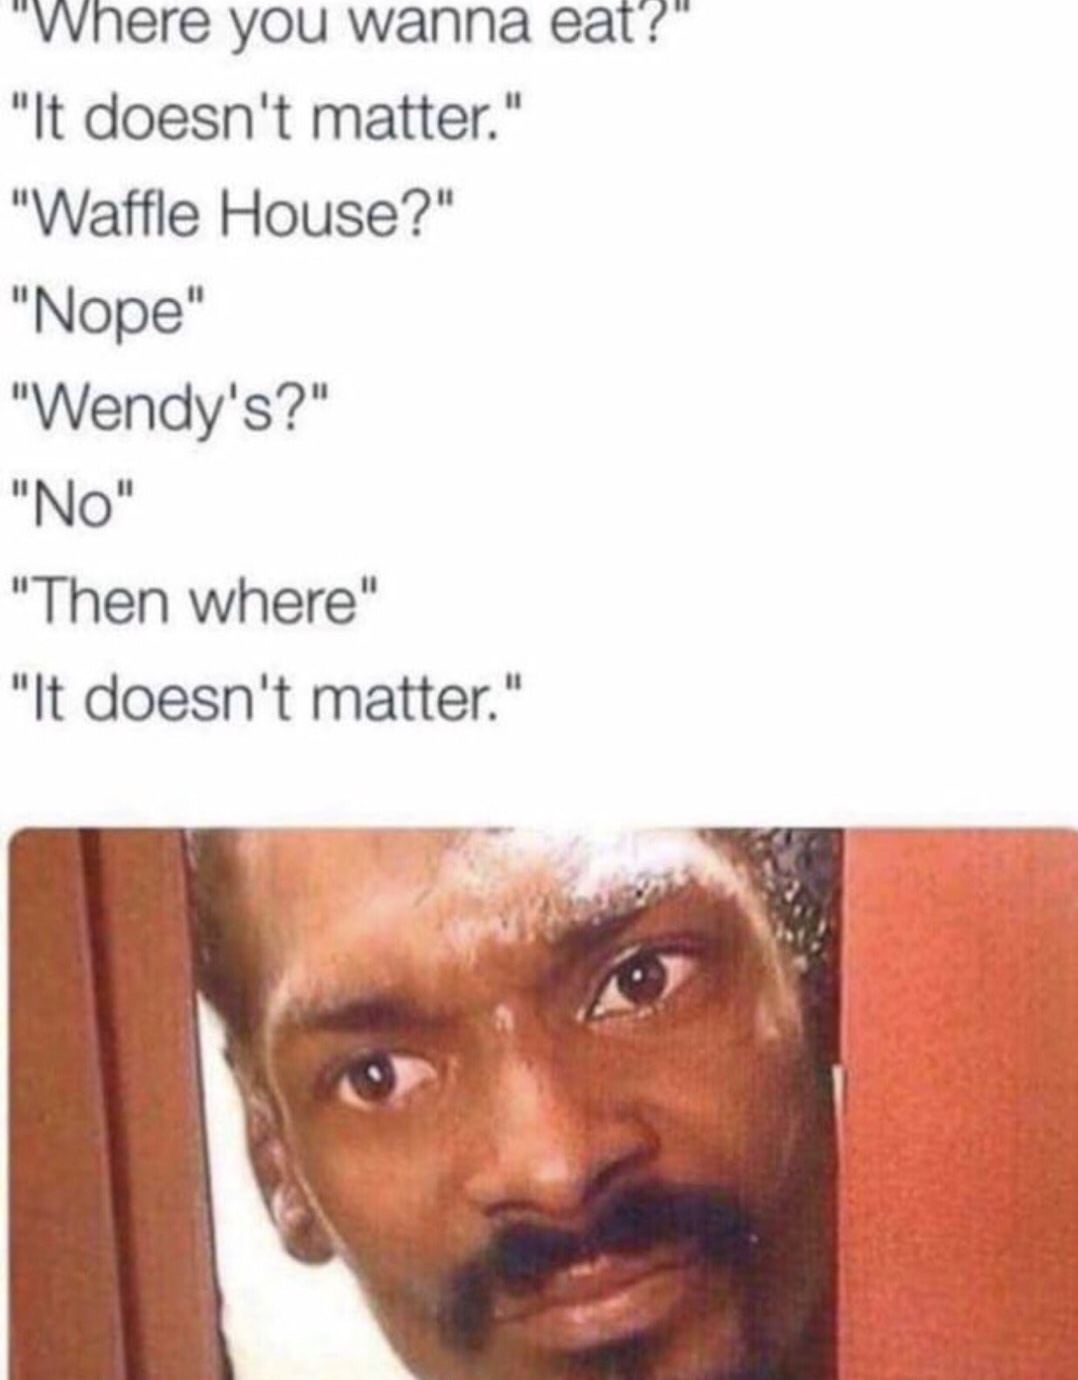 memes - rly bitch - "Where you wanna eat?" "It doesn't matter." "Waffle House?" "Nope" "Wendy's?" "No" "Then where" "It doesn't matter."